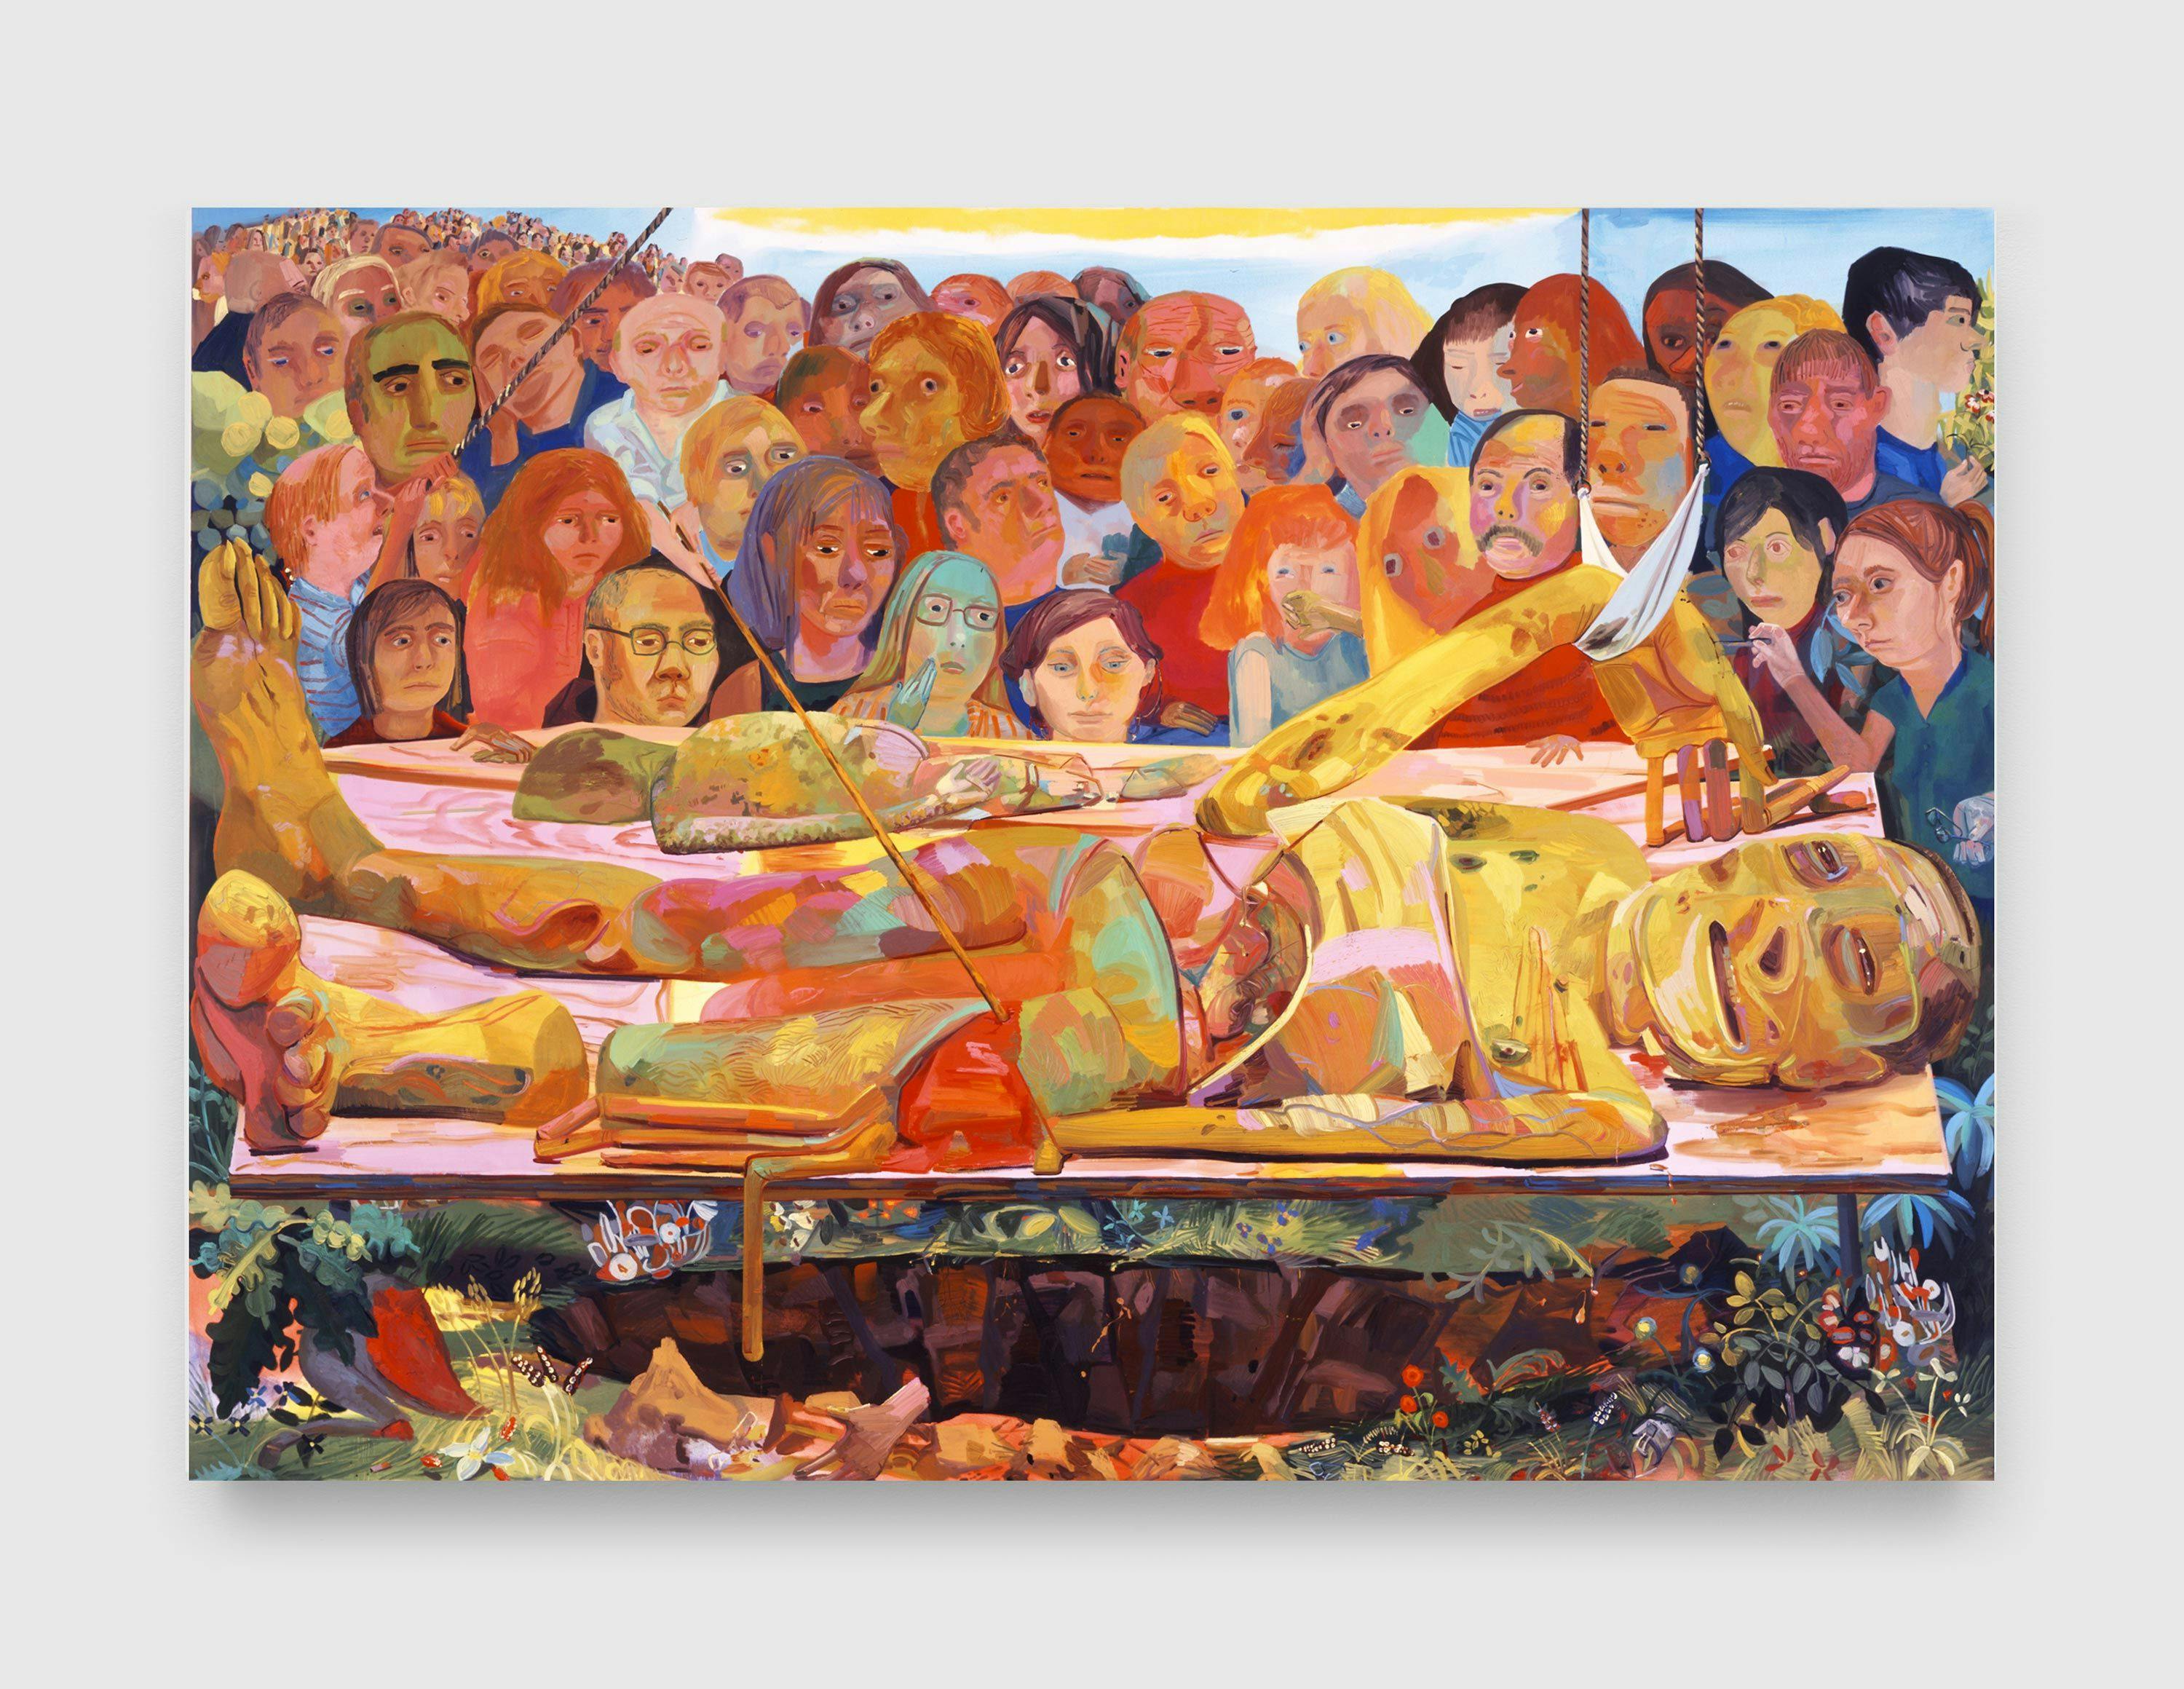 A painting by Dana Schutz, titled Presentation, dated 2005.